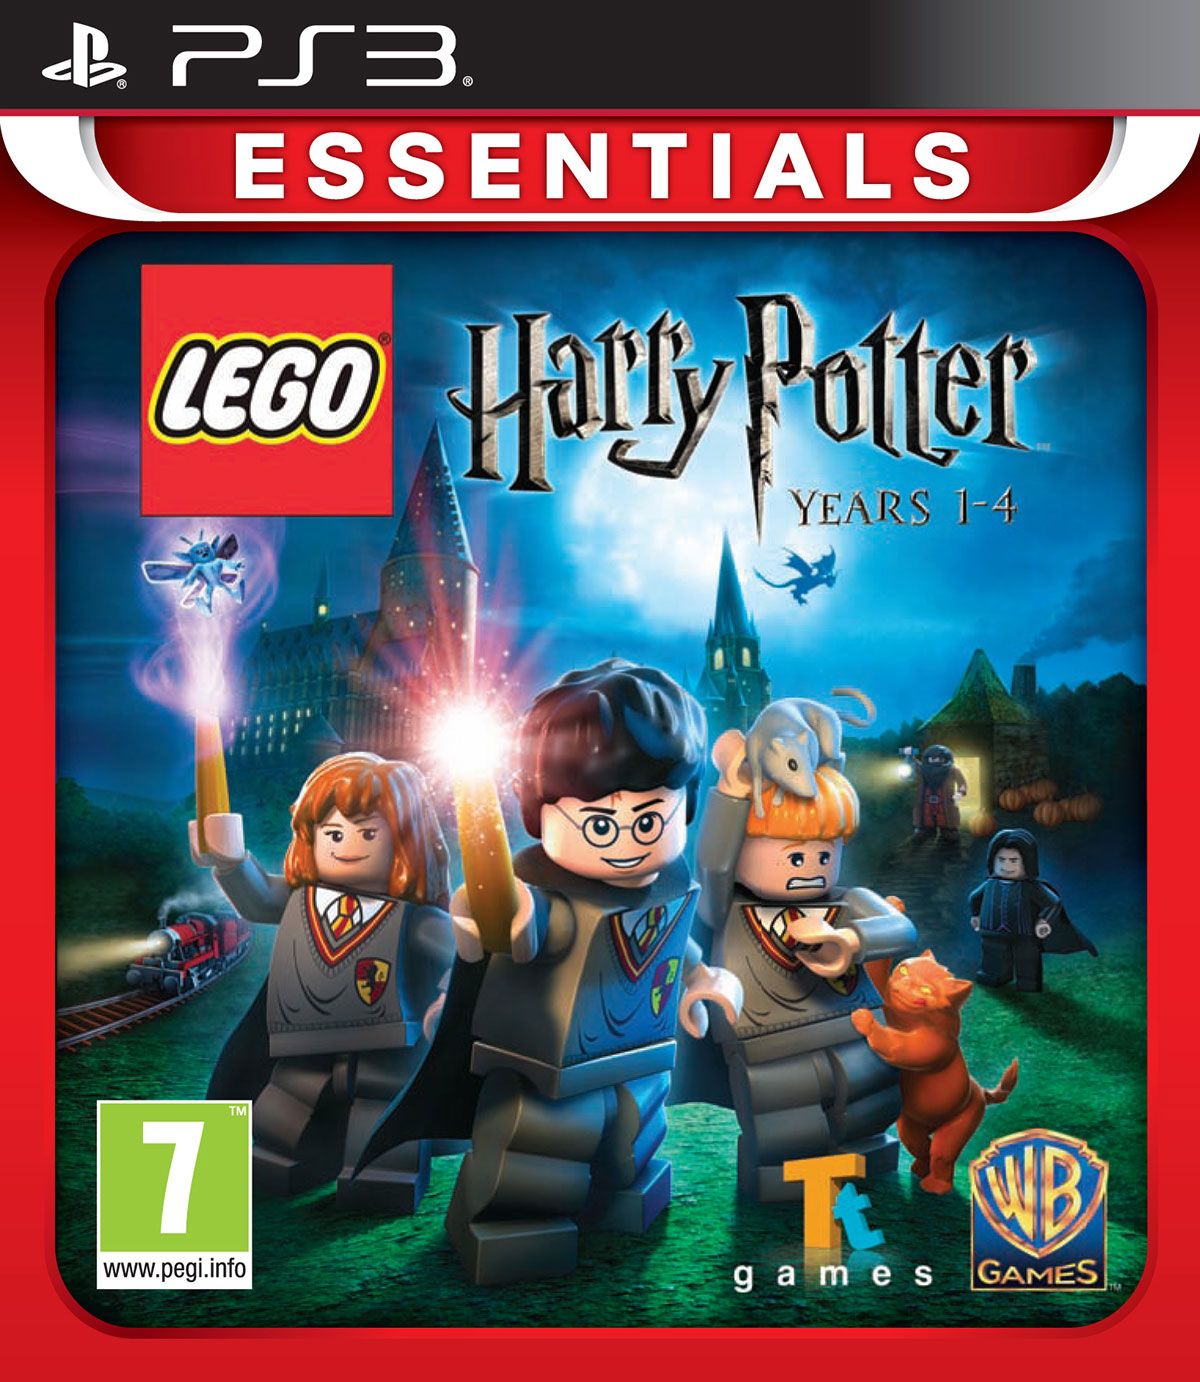 Harry Potter: Years 1-4 | from Pwned Games with confidence. | PS3 Games [new]